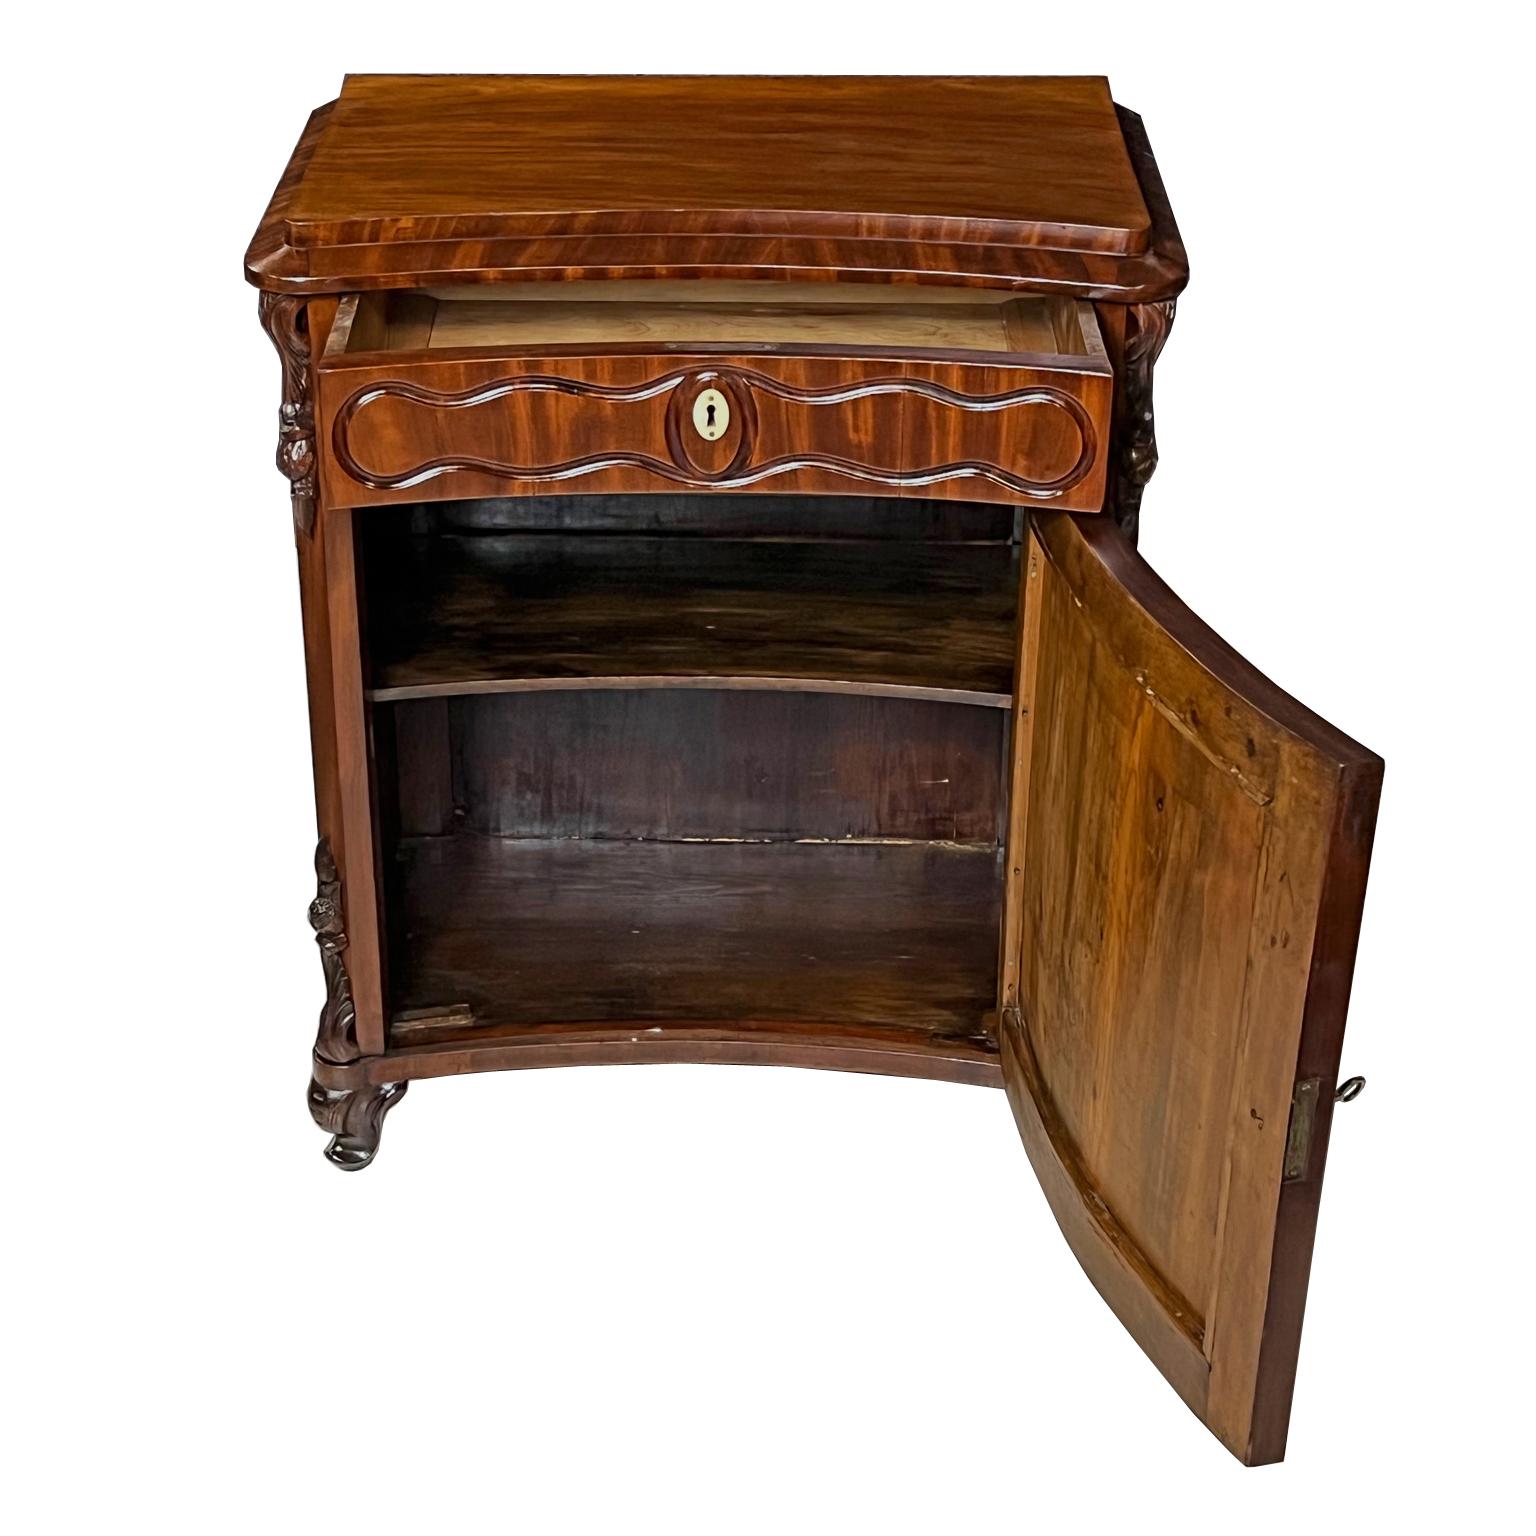 A very lovely Louis Philippe nightstand or side table in fine West Indies/ Cuban mahogany with a concave front. Offers one drawer over a cabinet door that opens to interior shelving. Features a pedestal top with curvilinear inset panels on drawer &